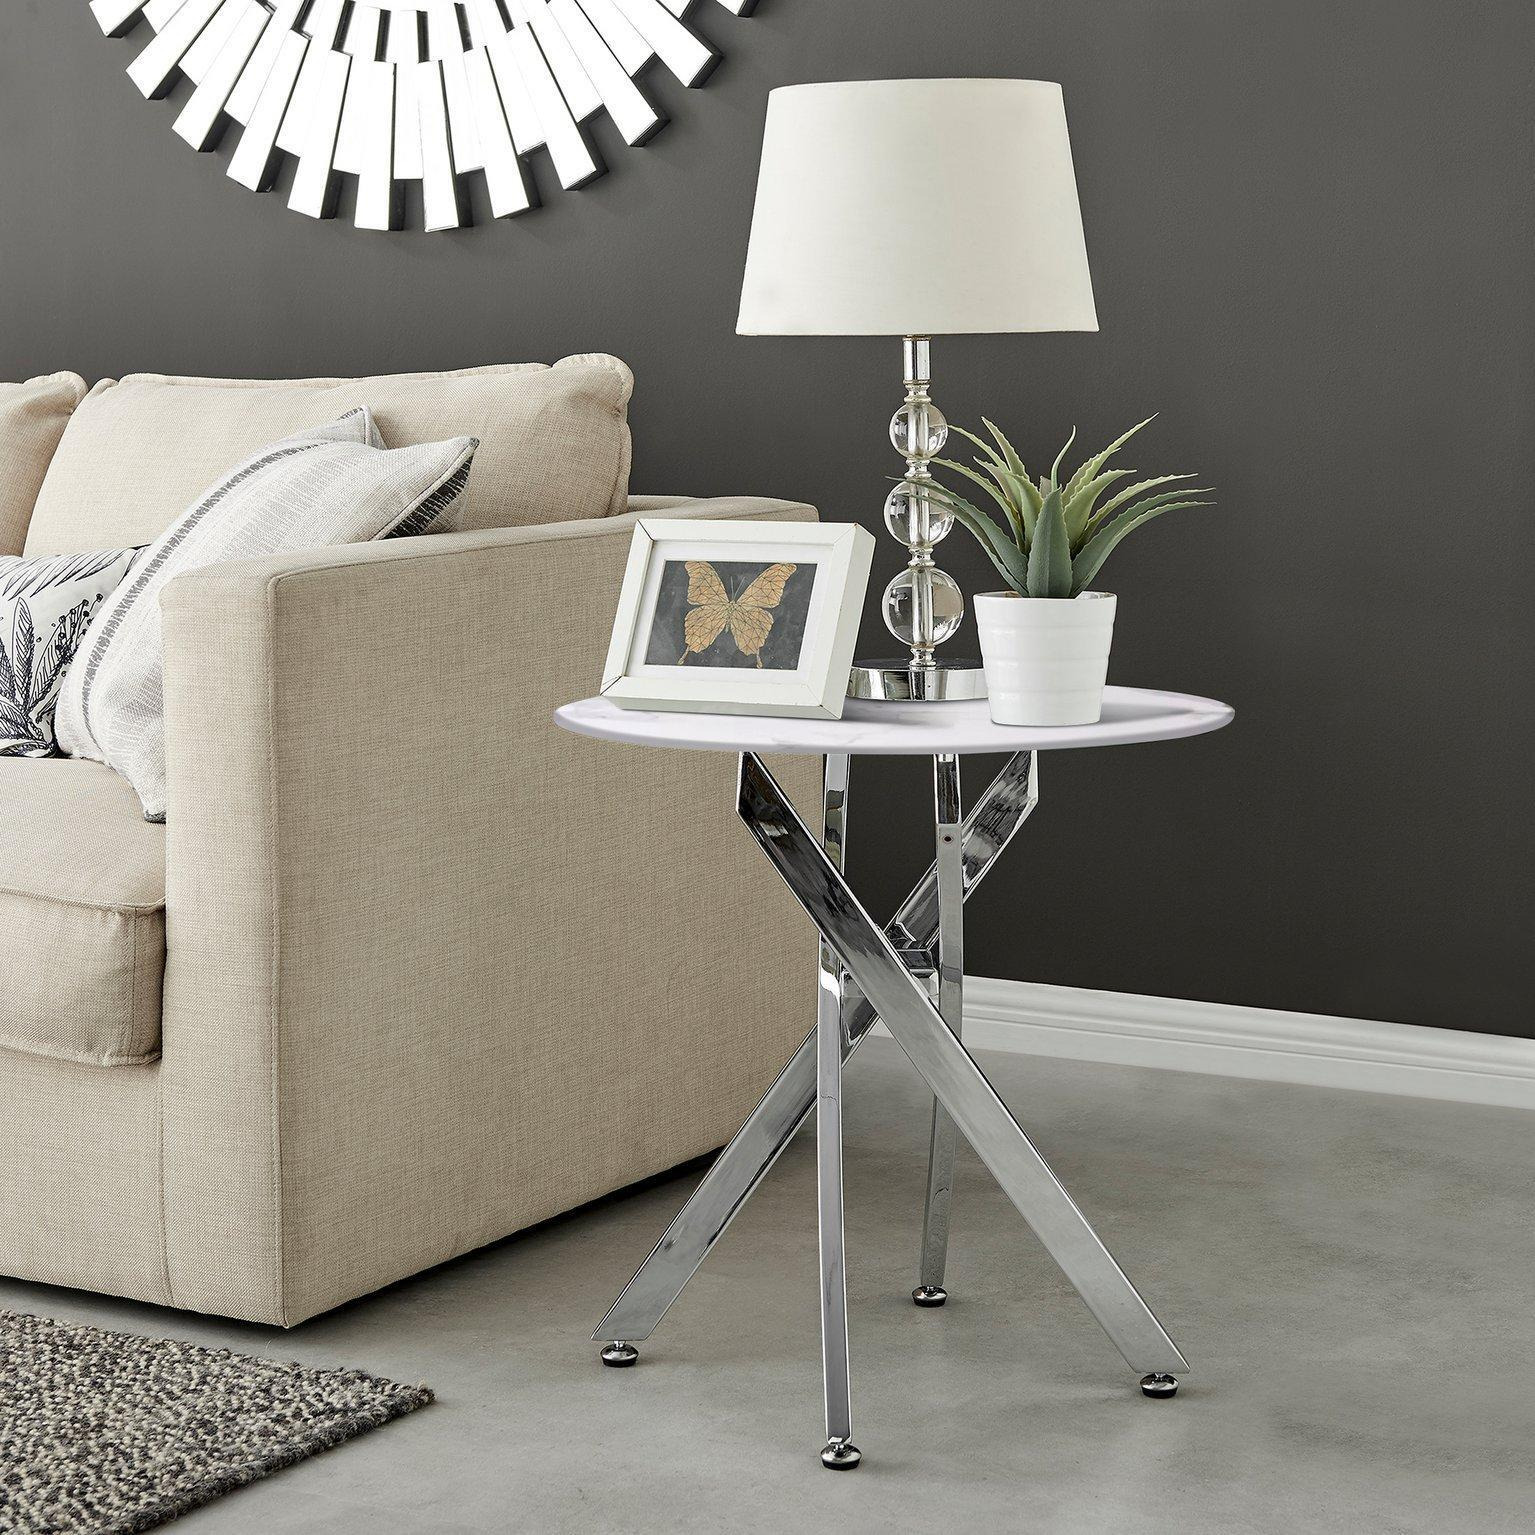 Novara Round Marble Effect Glass Top Side Table With Silver Metal Starburst Legs - image 1